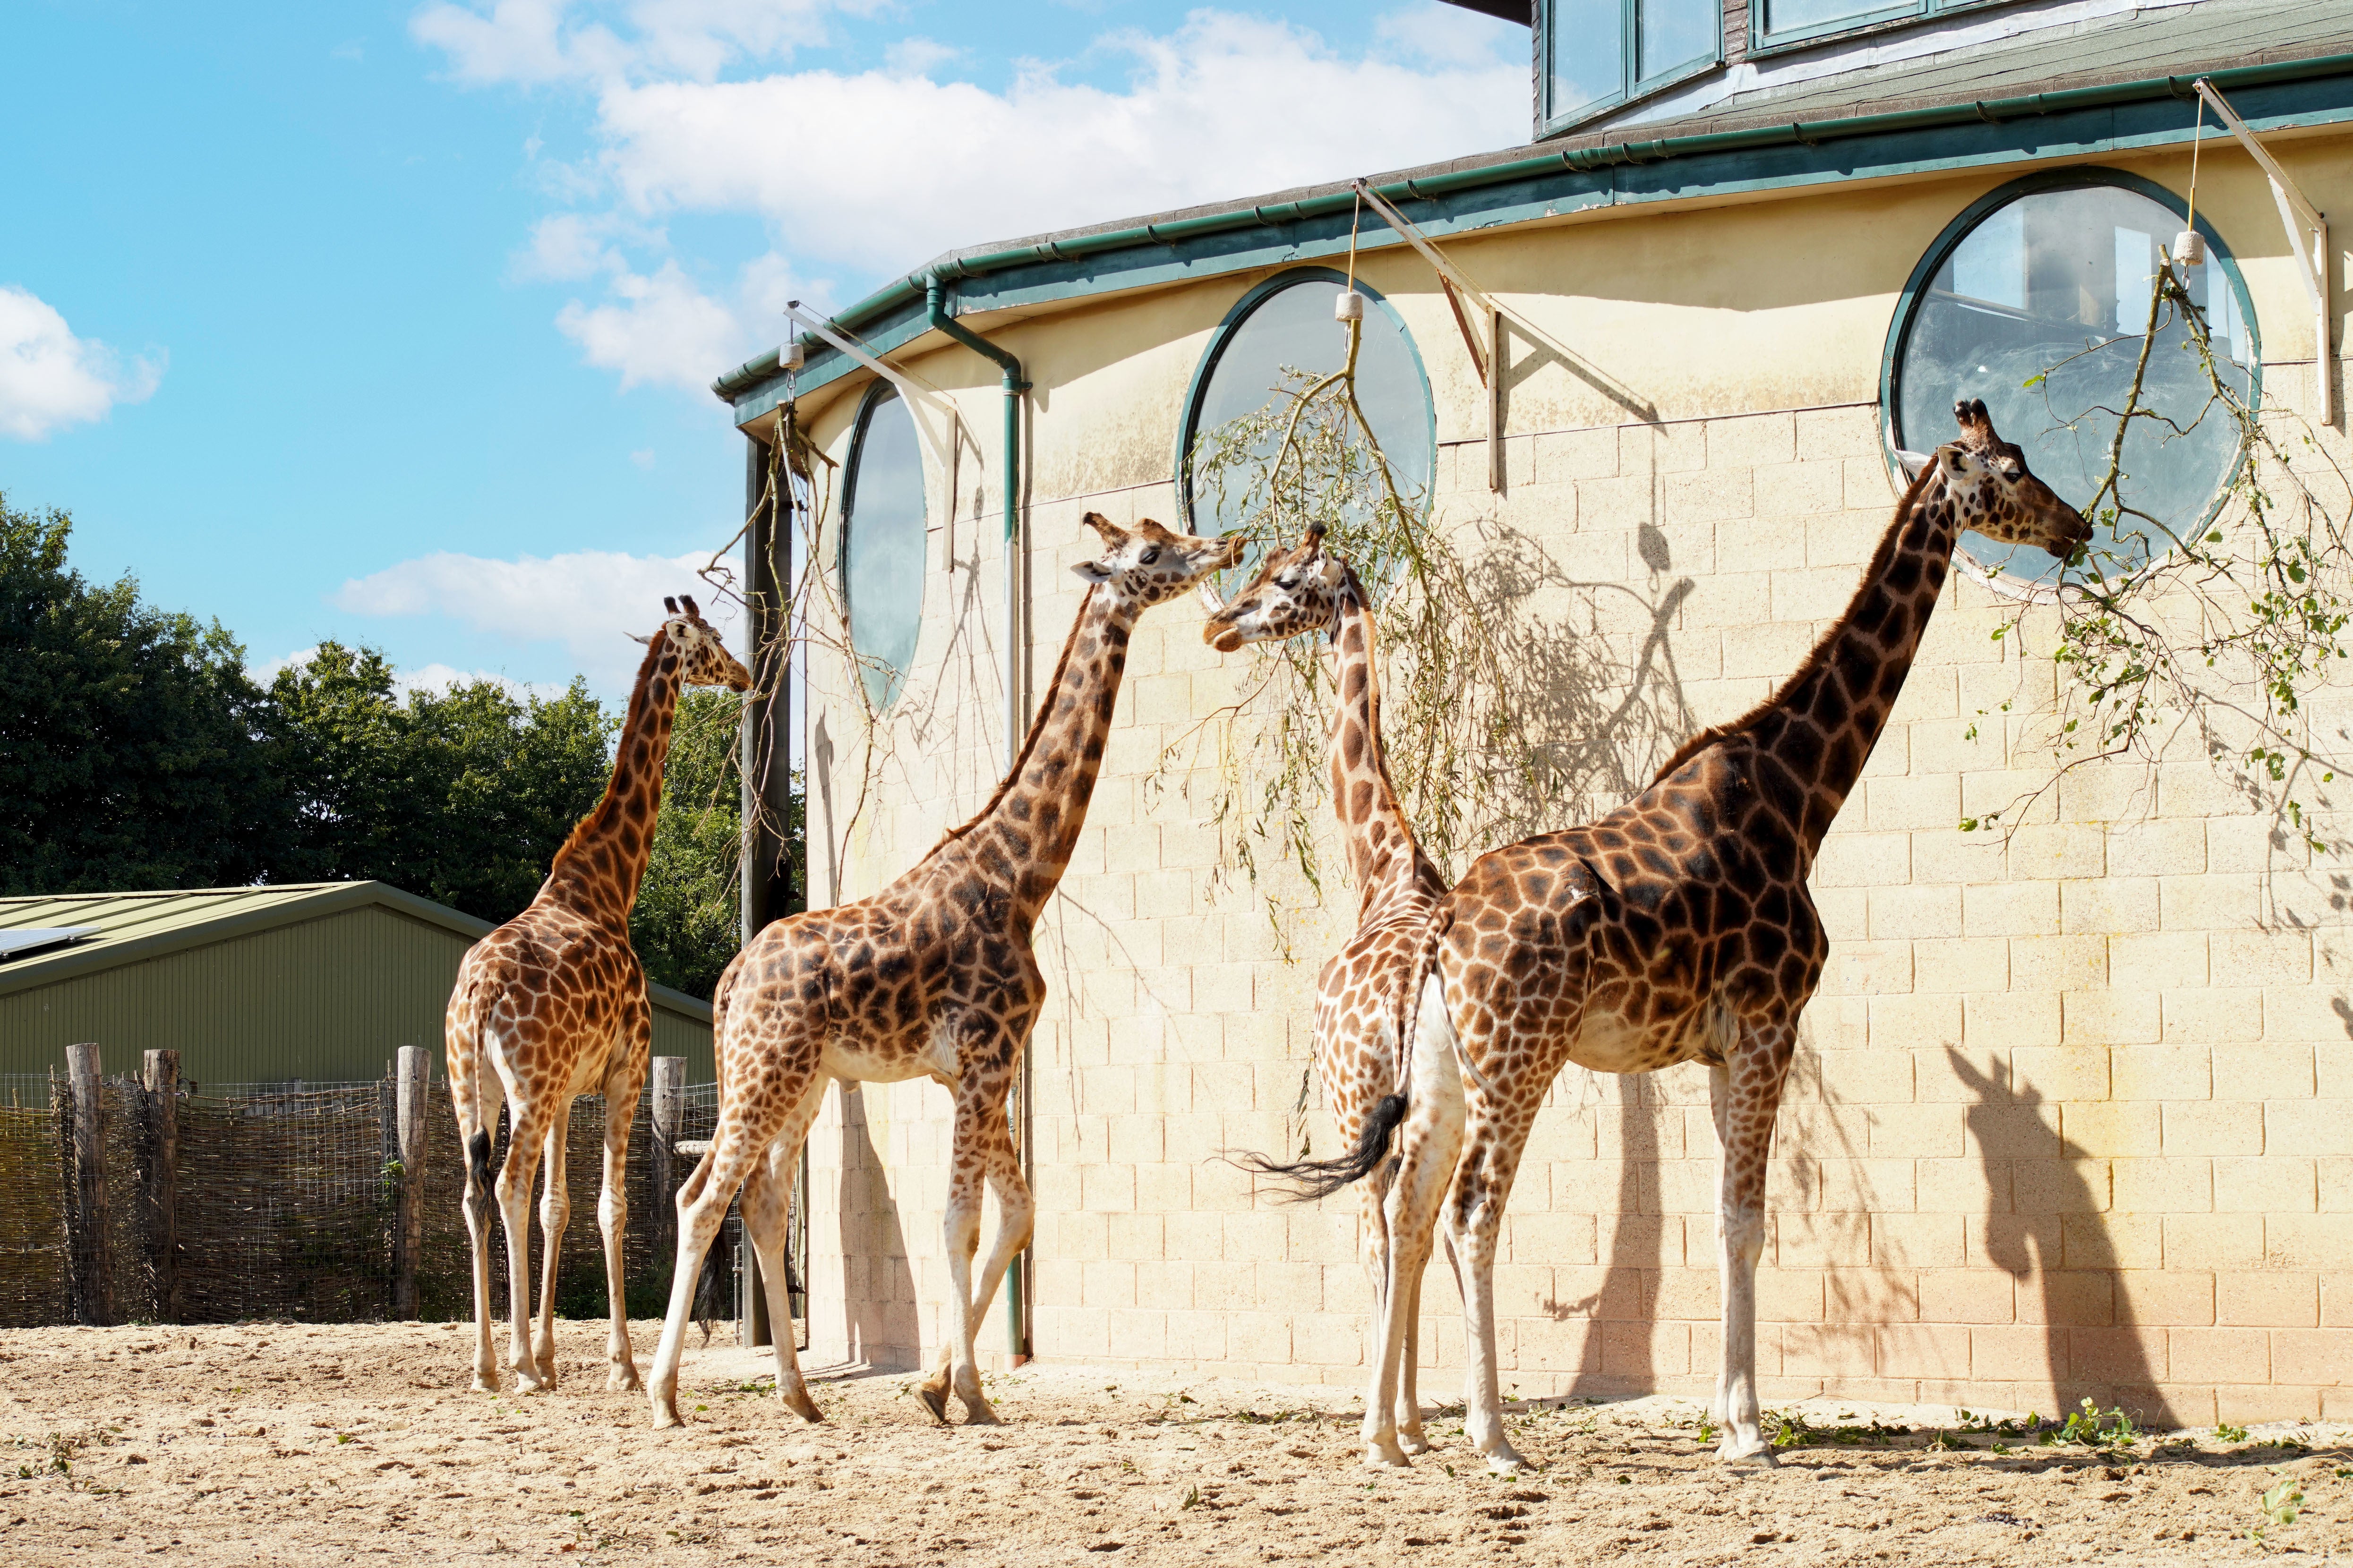 The distressed giraffe knocked itself against the door of its enclosure and suffered leg wounds